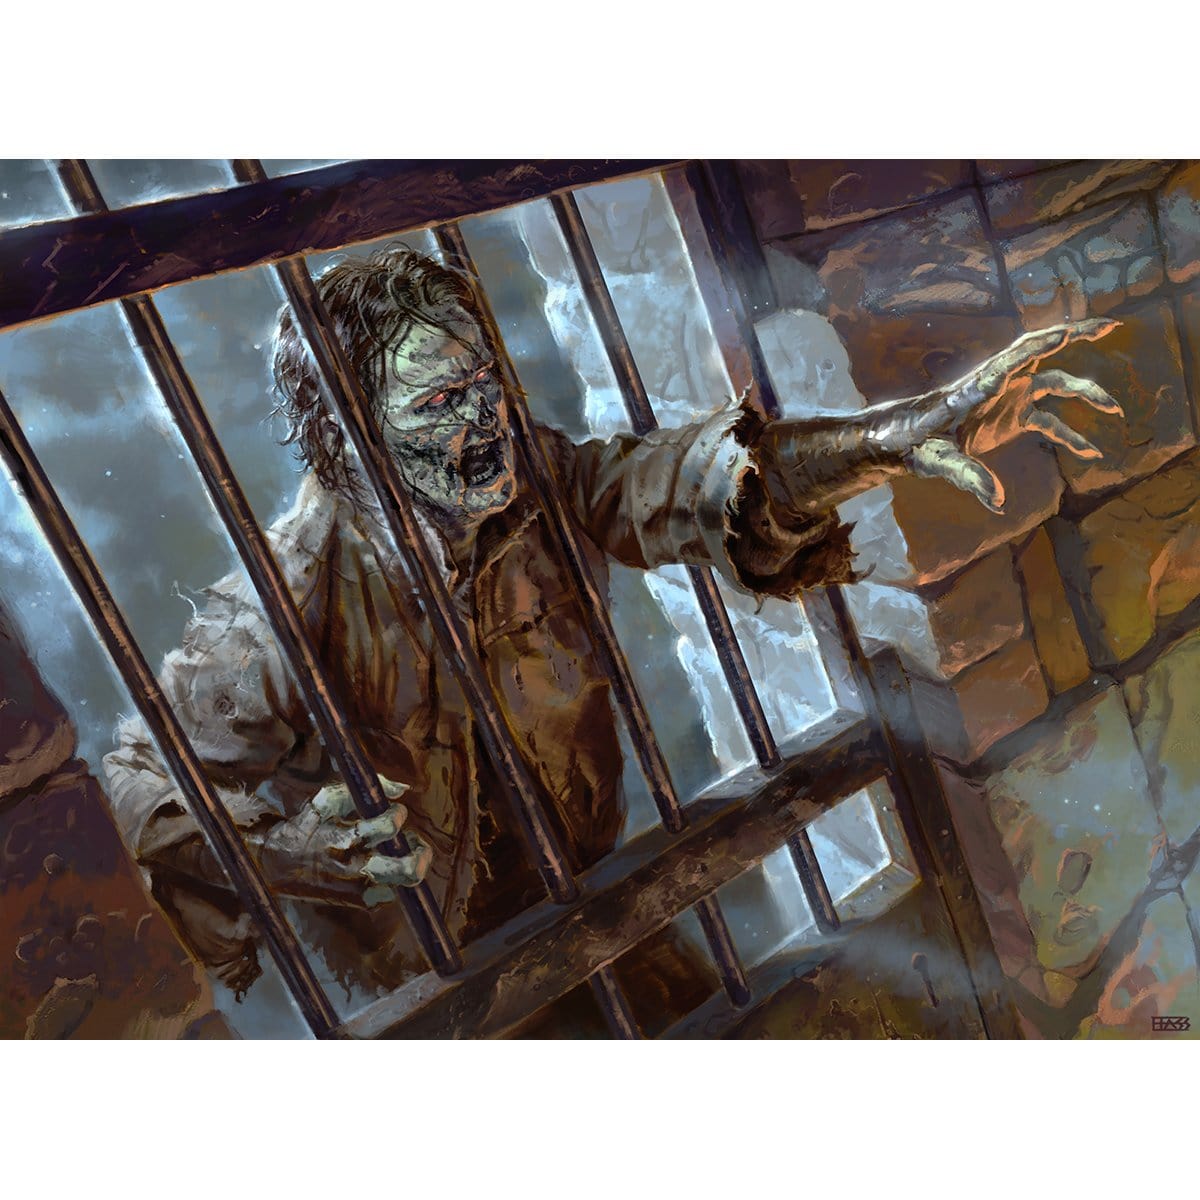 Caged Zombie Print